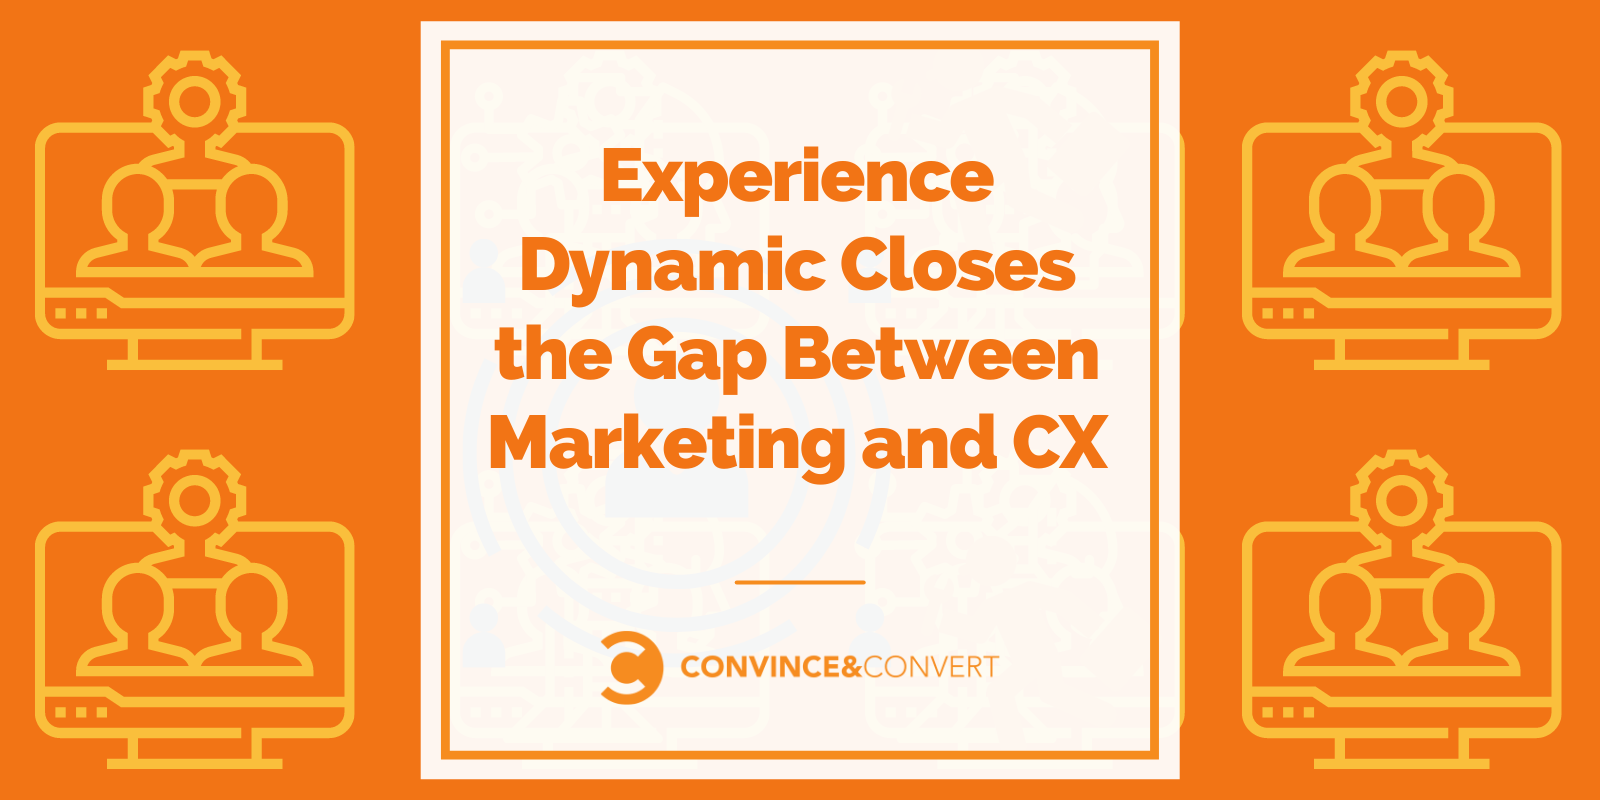 Experience Dynamic Closes the Gap Between Marketing and CX